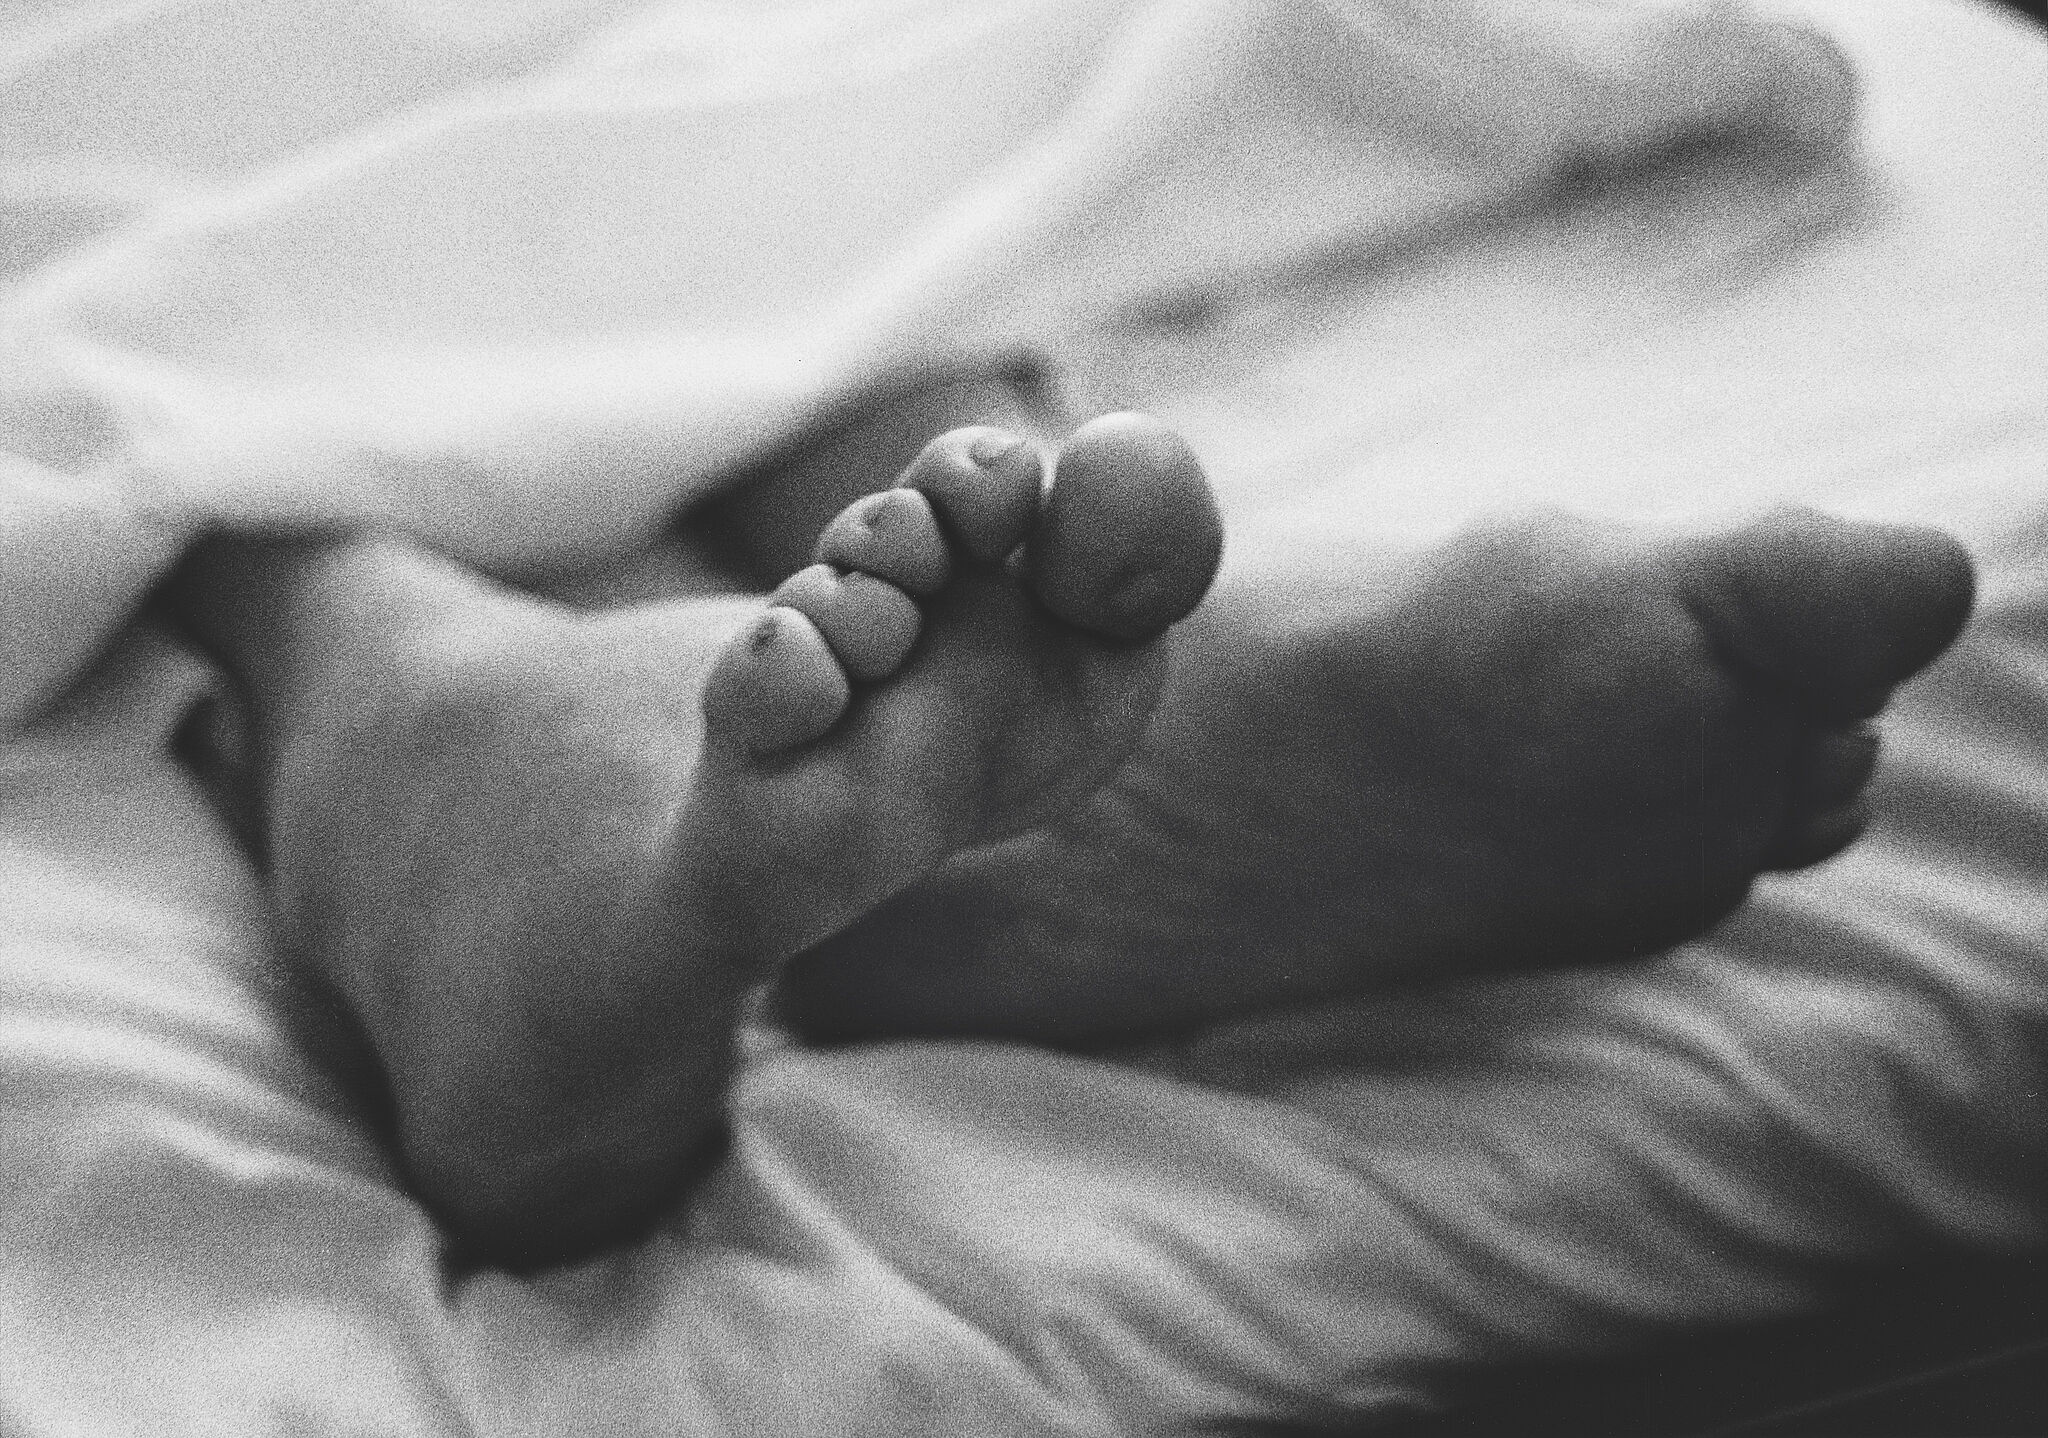 Photograph of feet on a bed in black and white. 